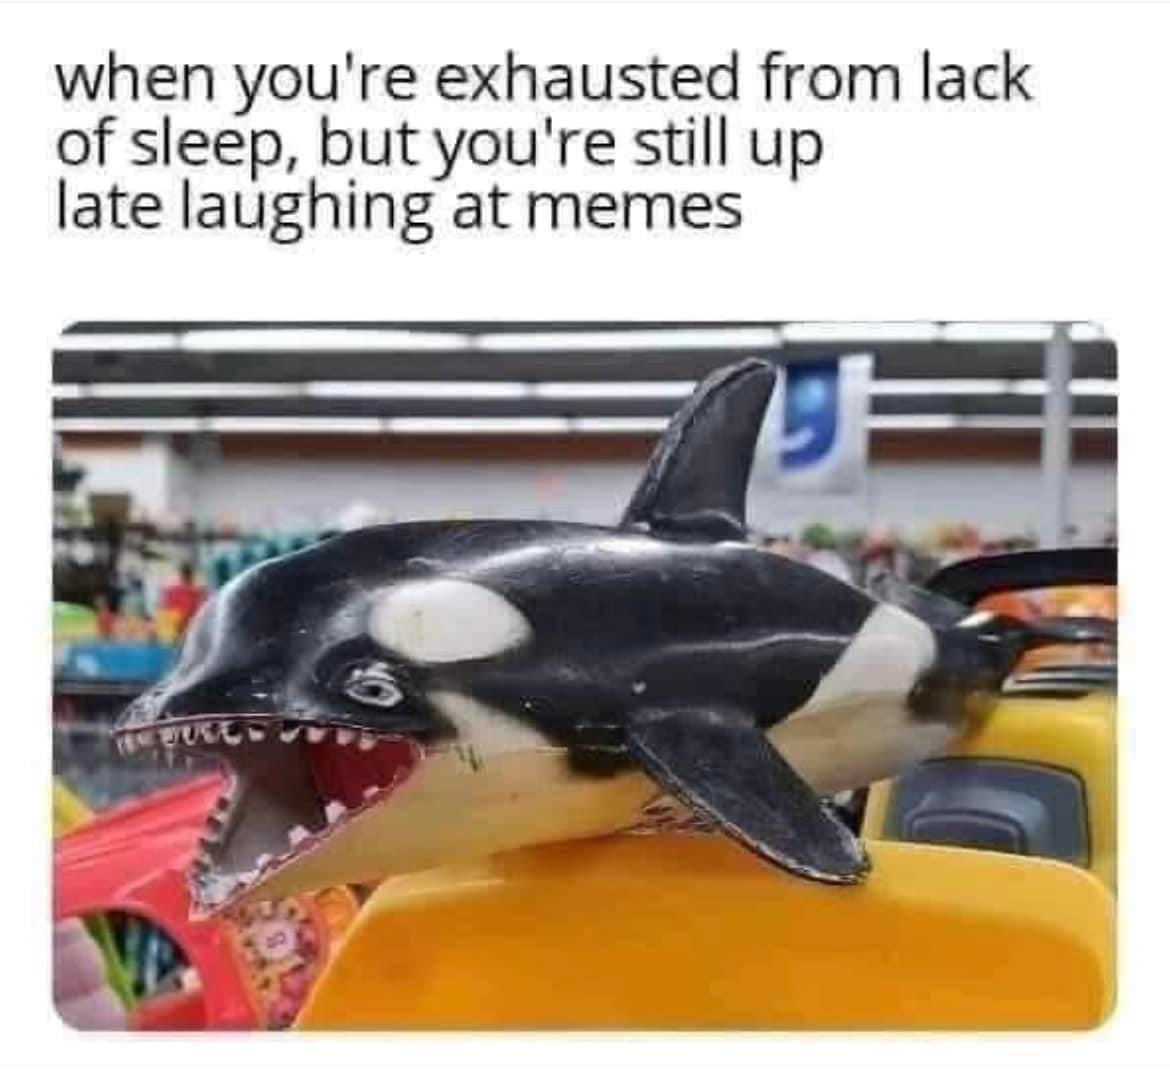 Fresh memes - when you're exhausted from lack of sleep, but you're still up late laughing at memes